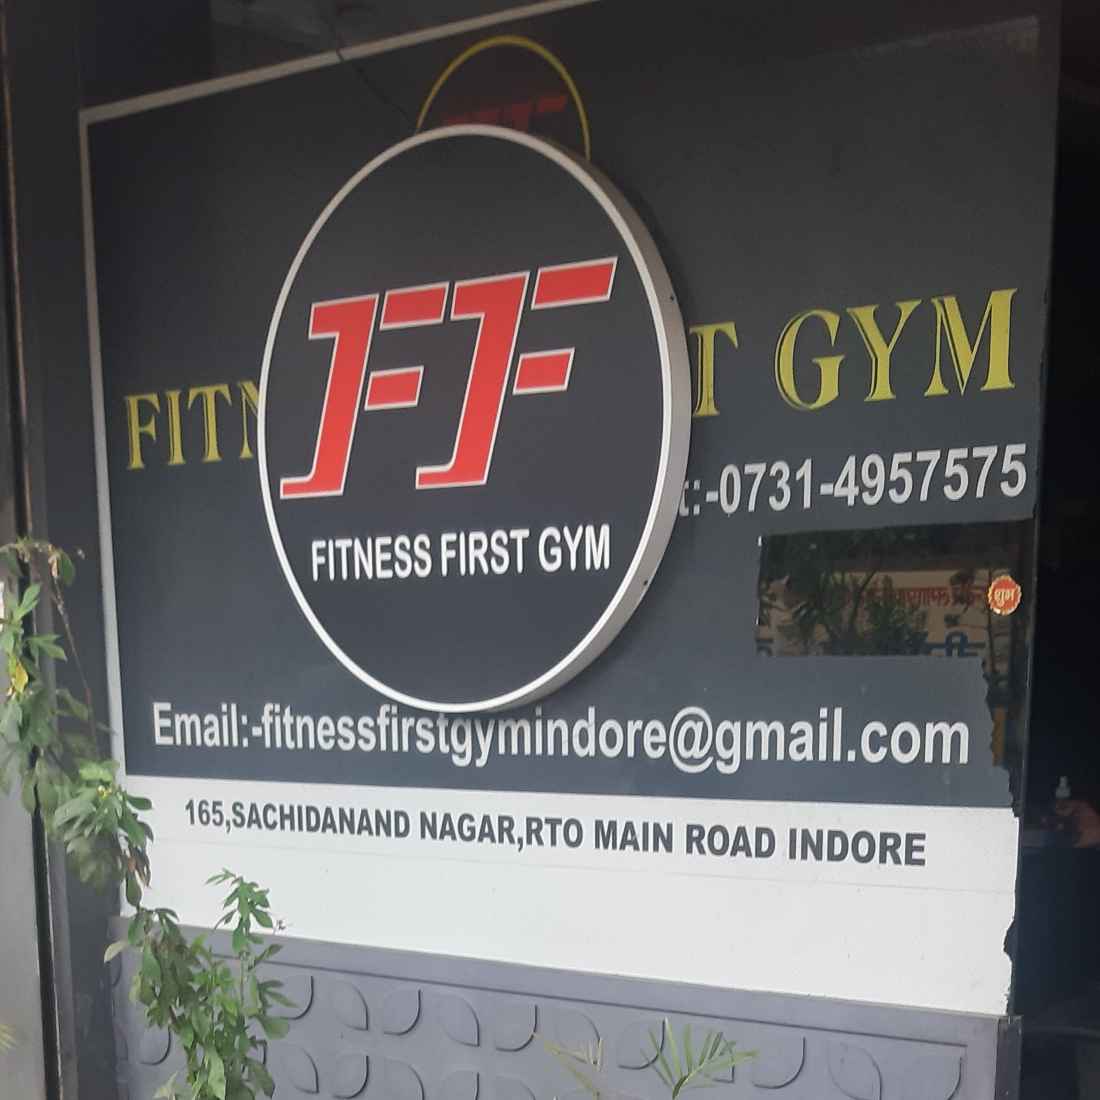 Fitness first gym